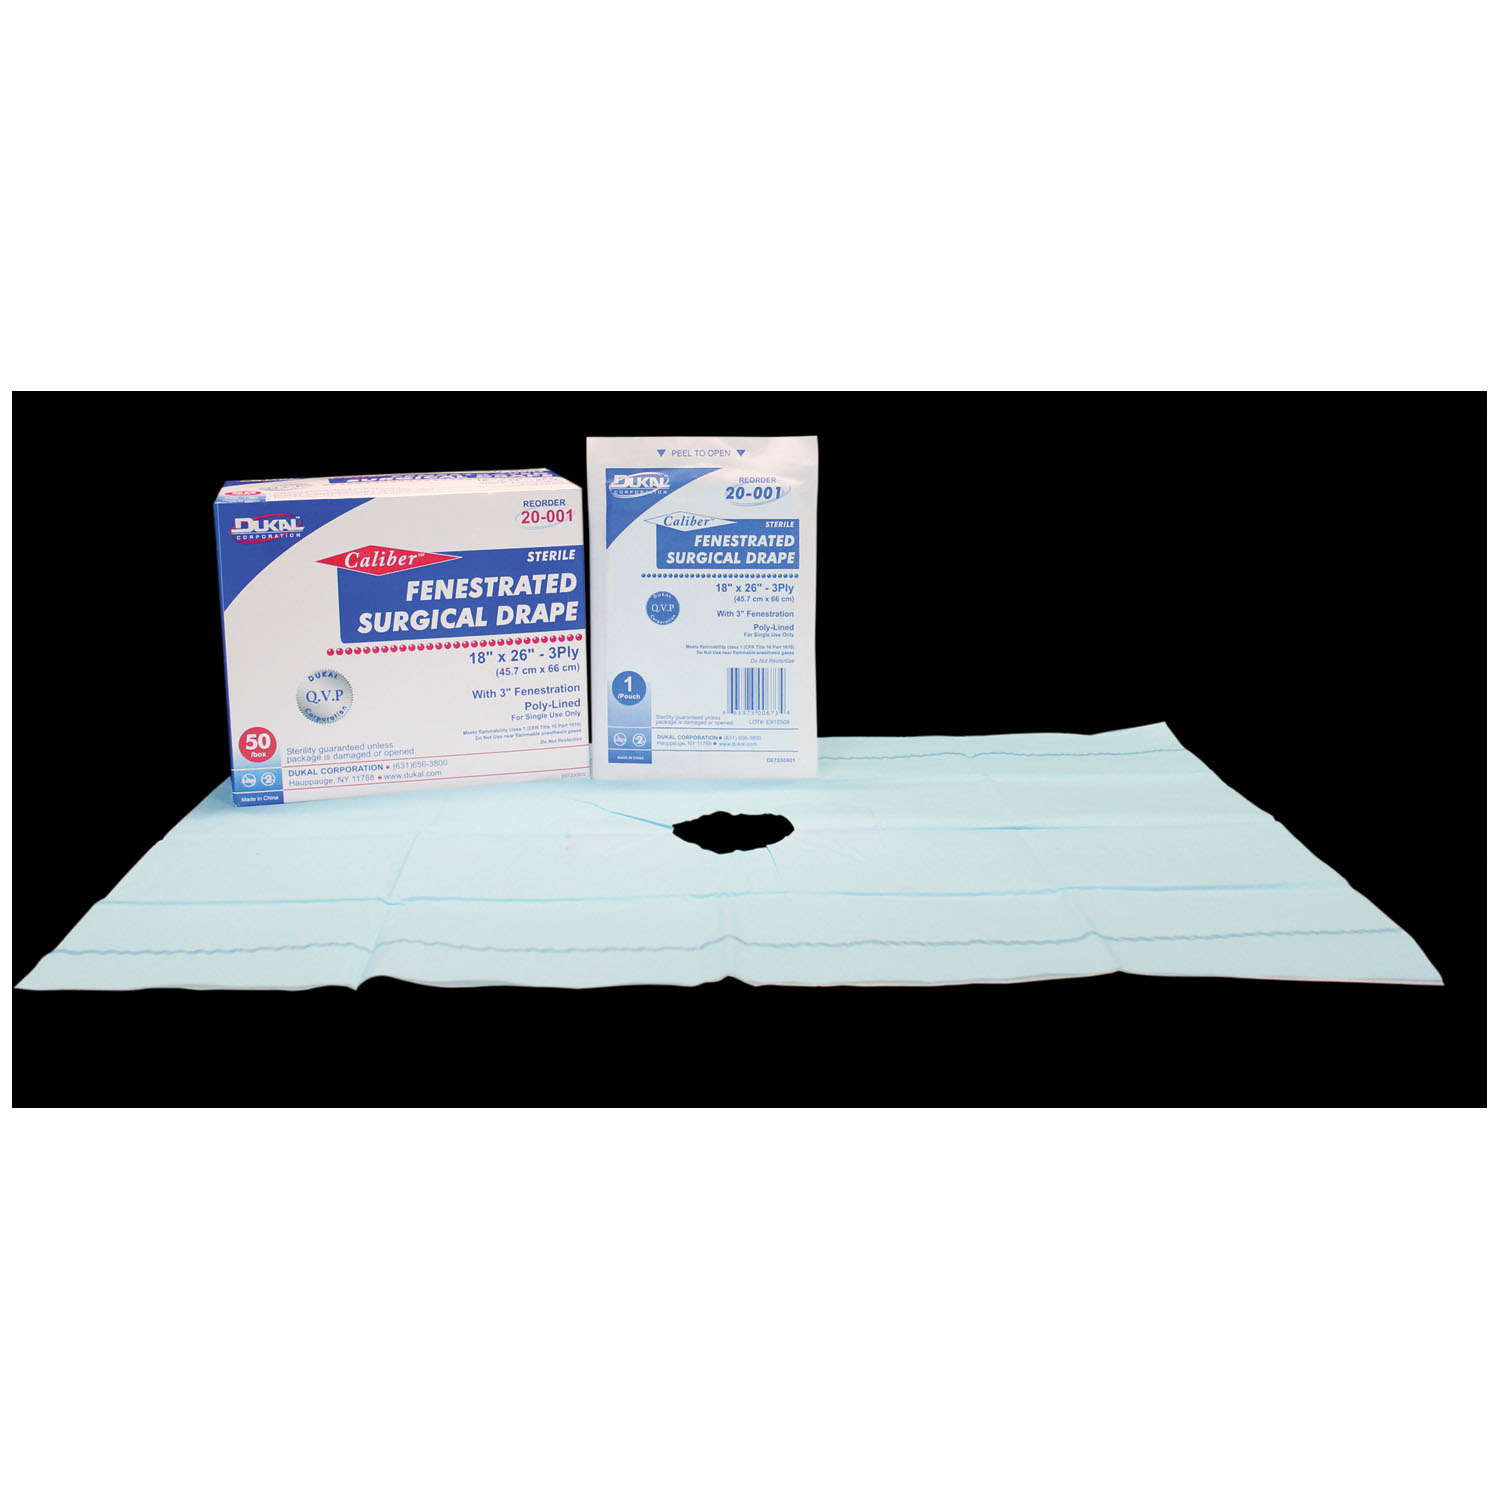 DUKAL SURGICAL DRAPES : 20-001 BX $20.91 Stocked